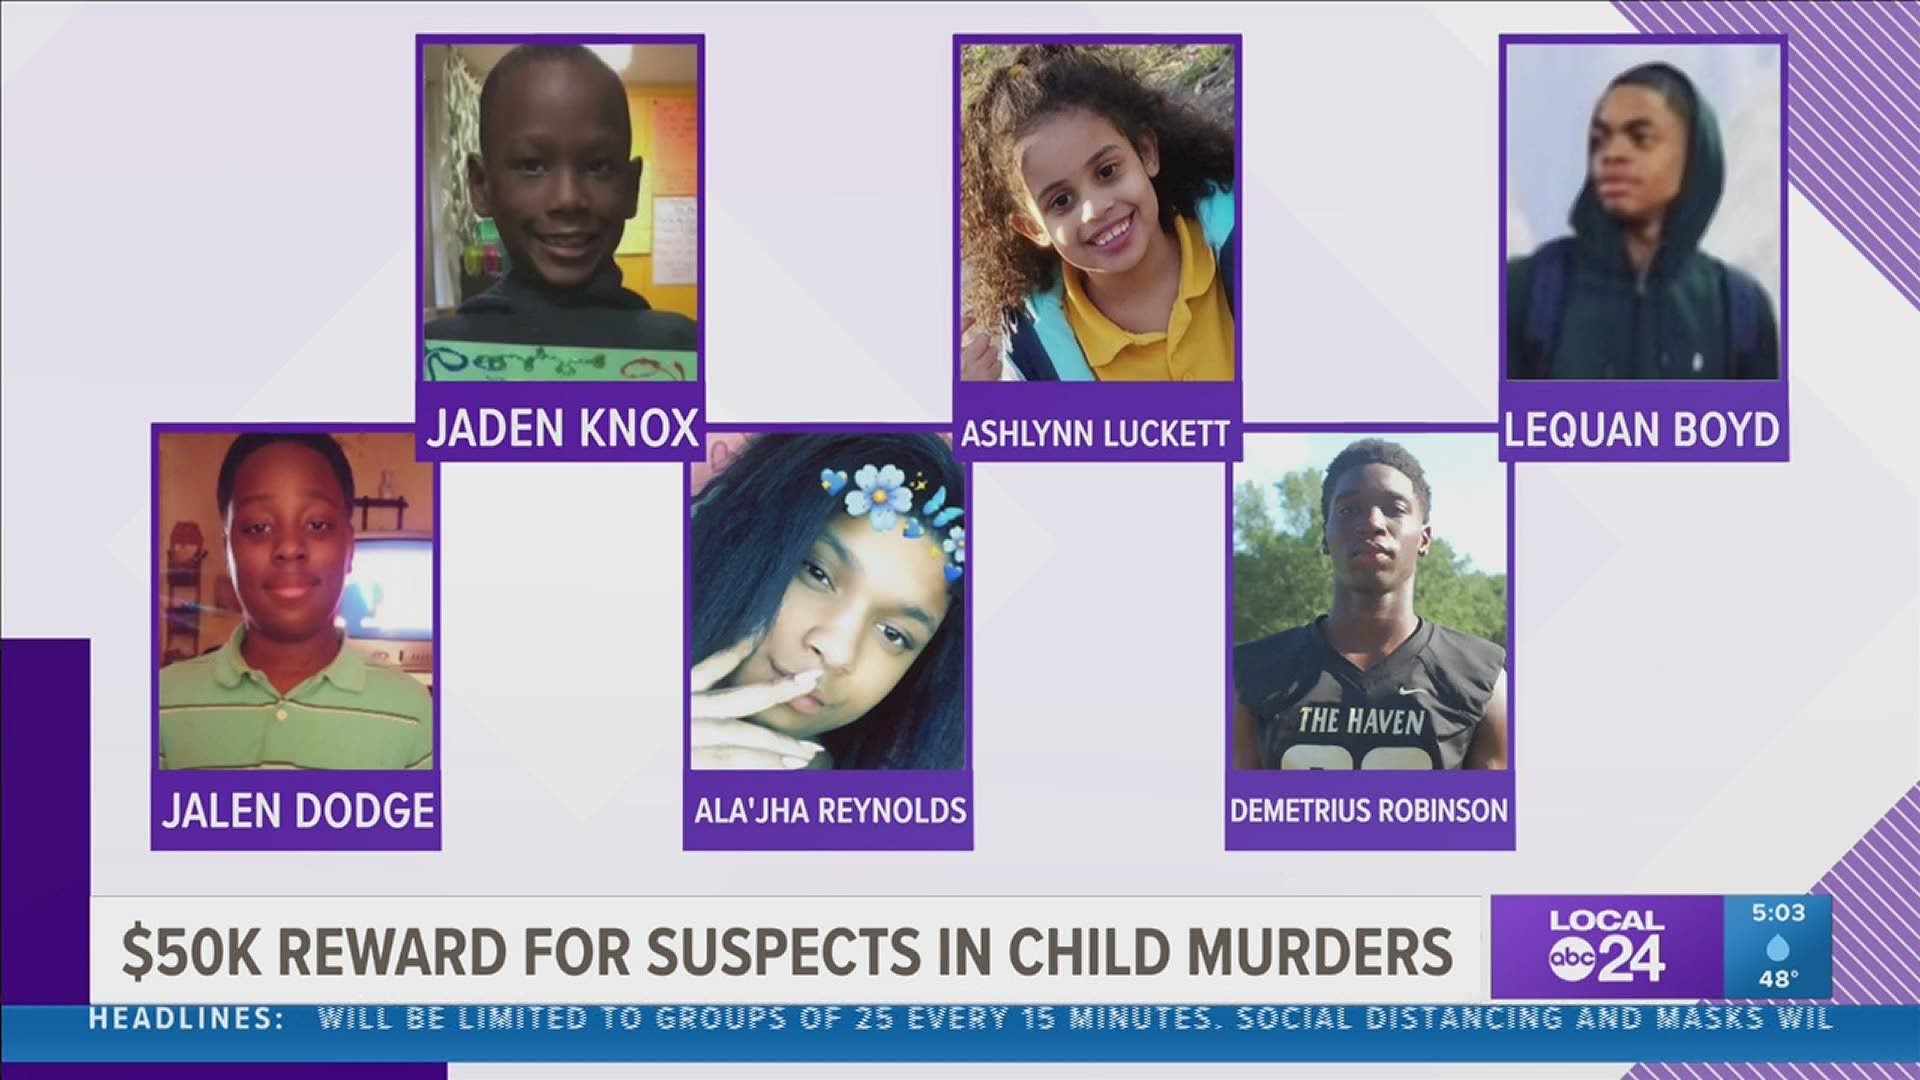 Between January and September of 2020, the Memphis Police Department has investigated an unusually high number of child murders. Seven are still unsolved.